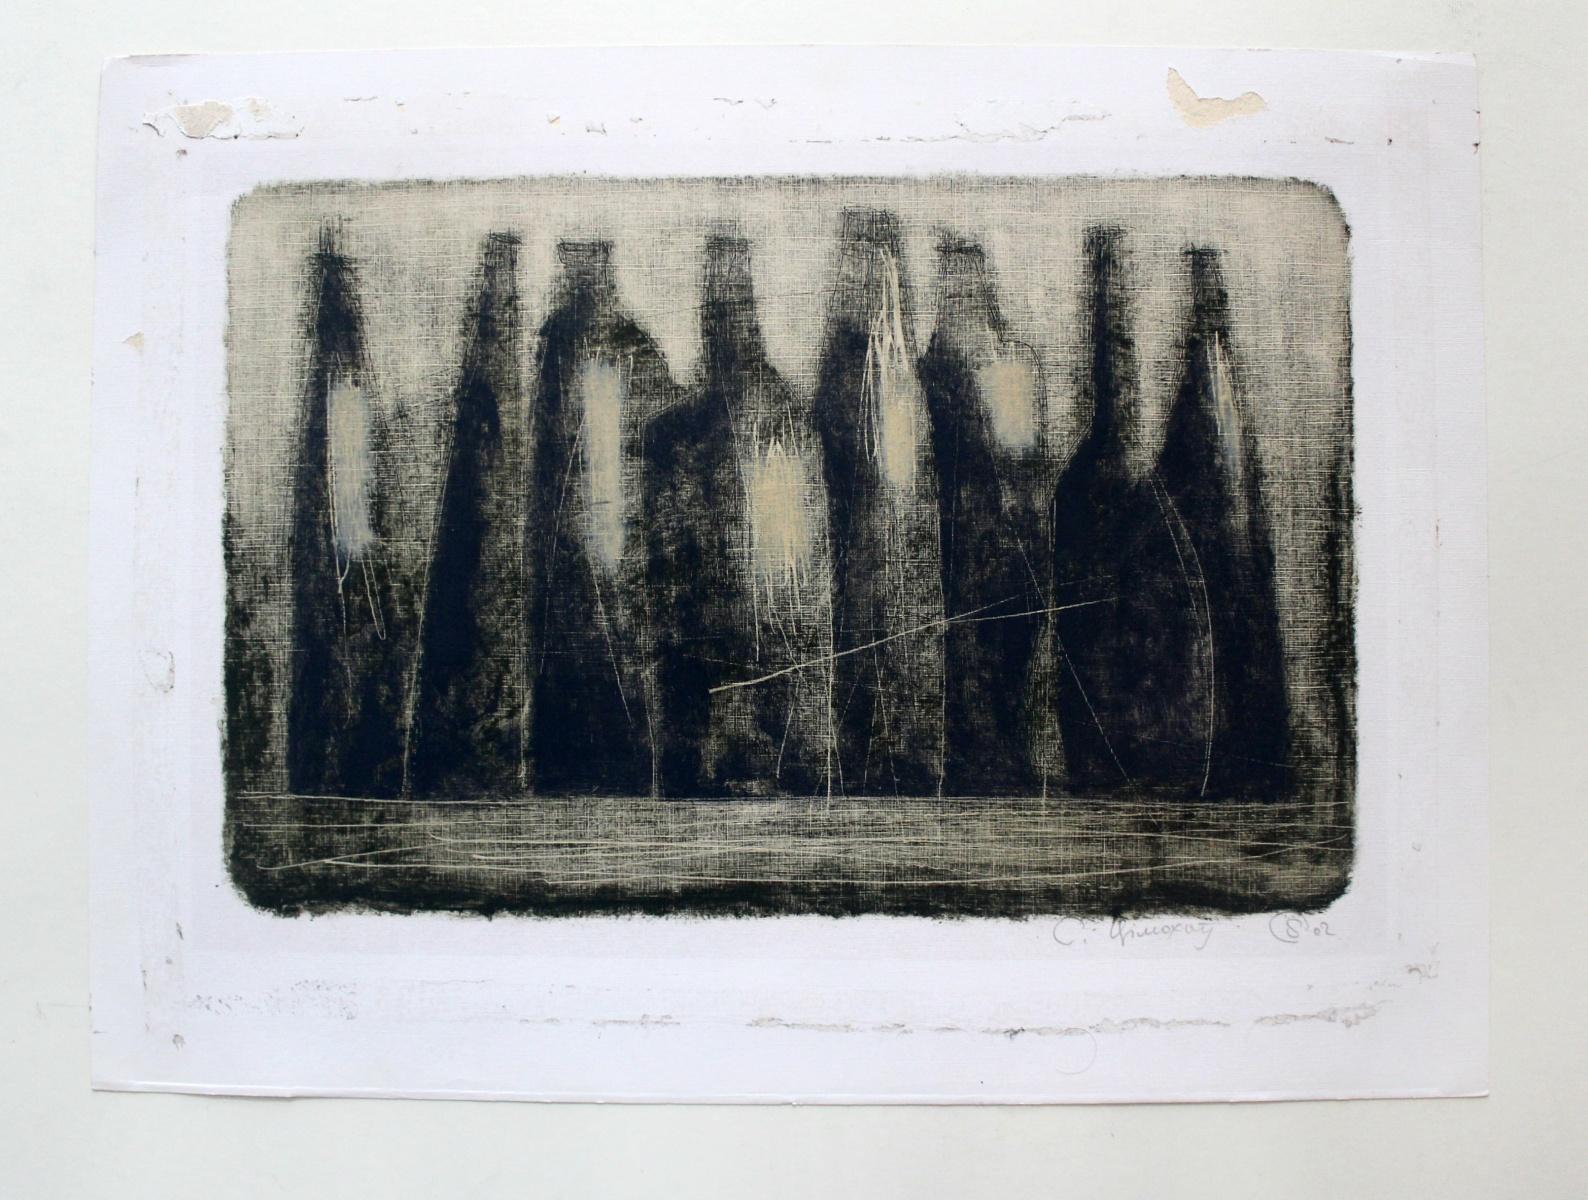 Still life with bottles - XXI Century, Contemporary Monotype Print, Dark colors - Black Still-Life Print by Siergiej Timochow